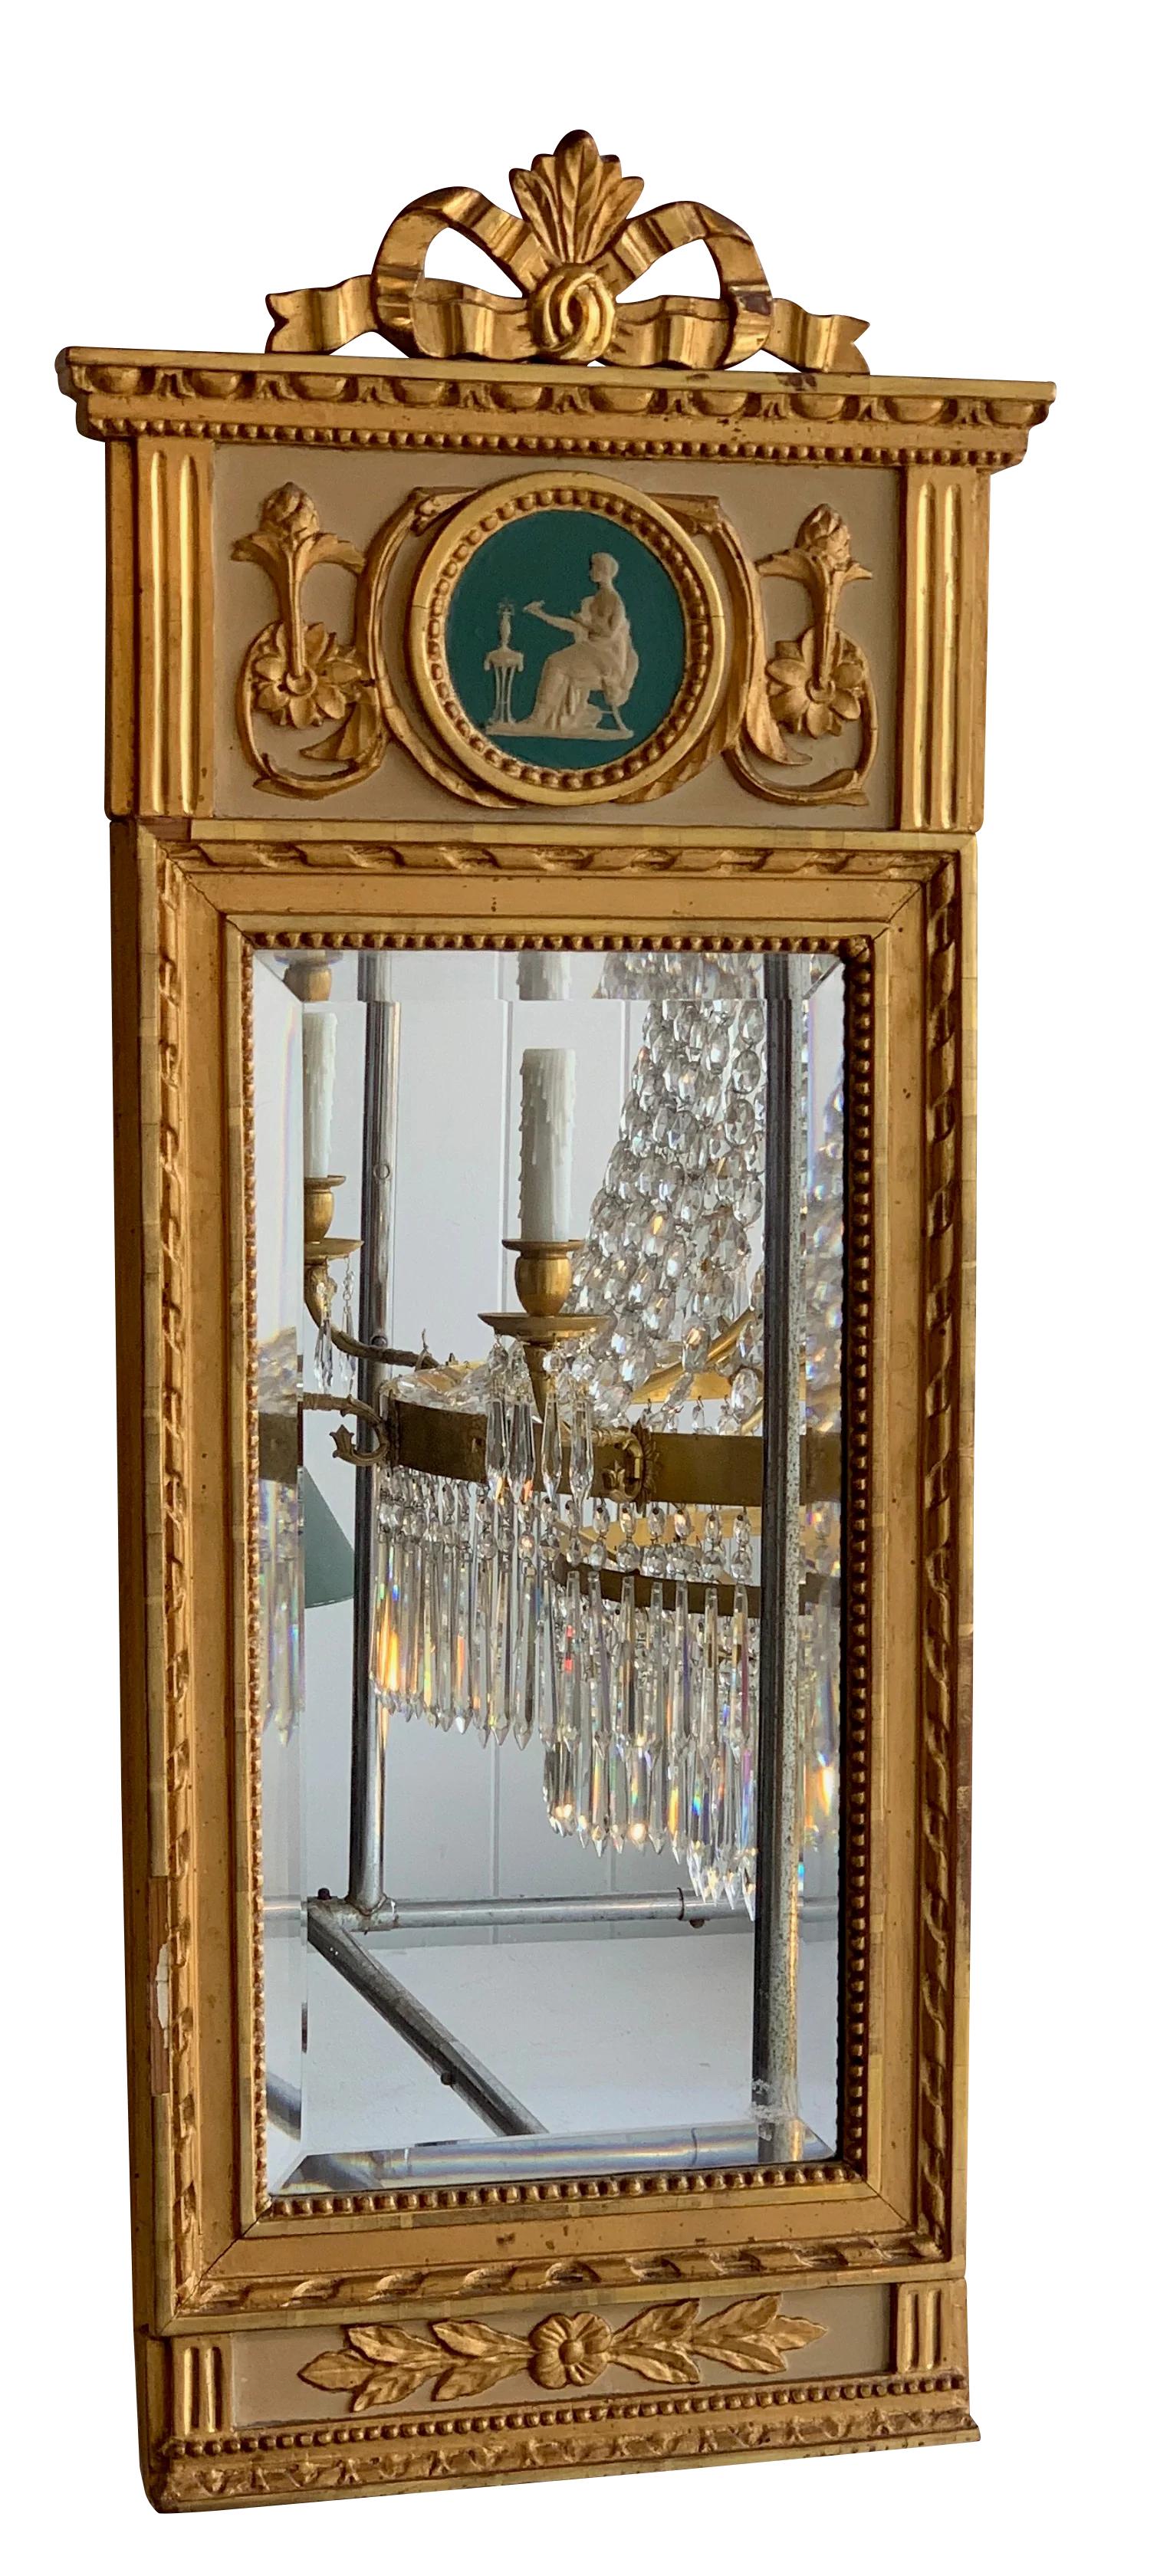 Swedish 19th Century Gilded mirror, having a ribbon crest above the crown molding over a classical jasperware medallion over a beveled mirror over a foliate panel. 

